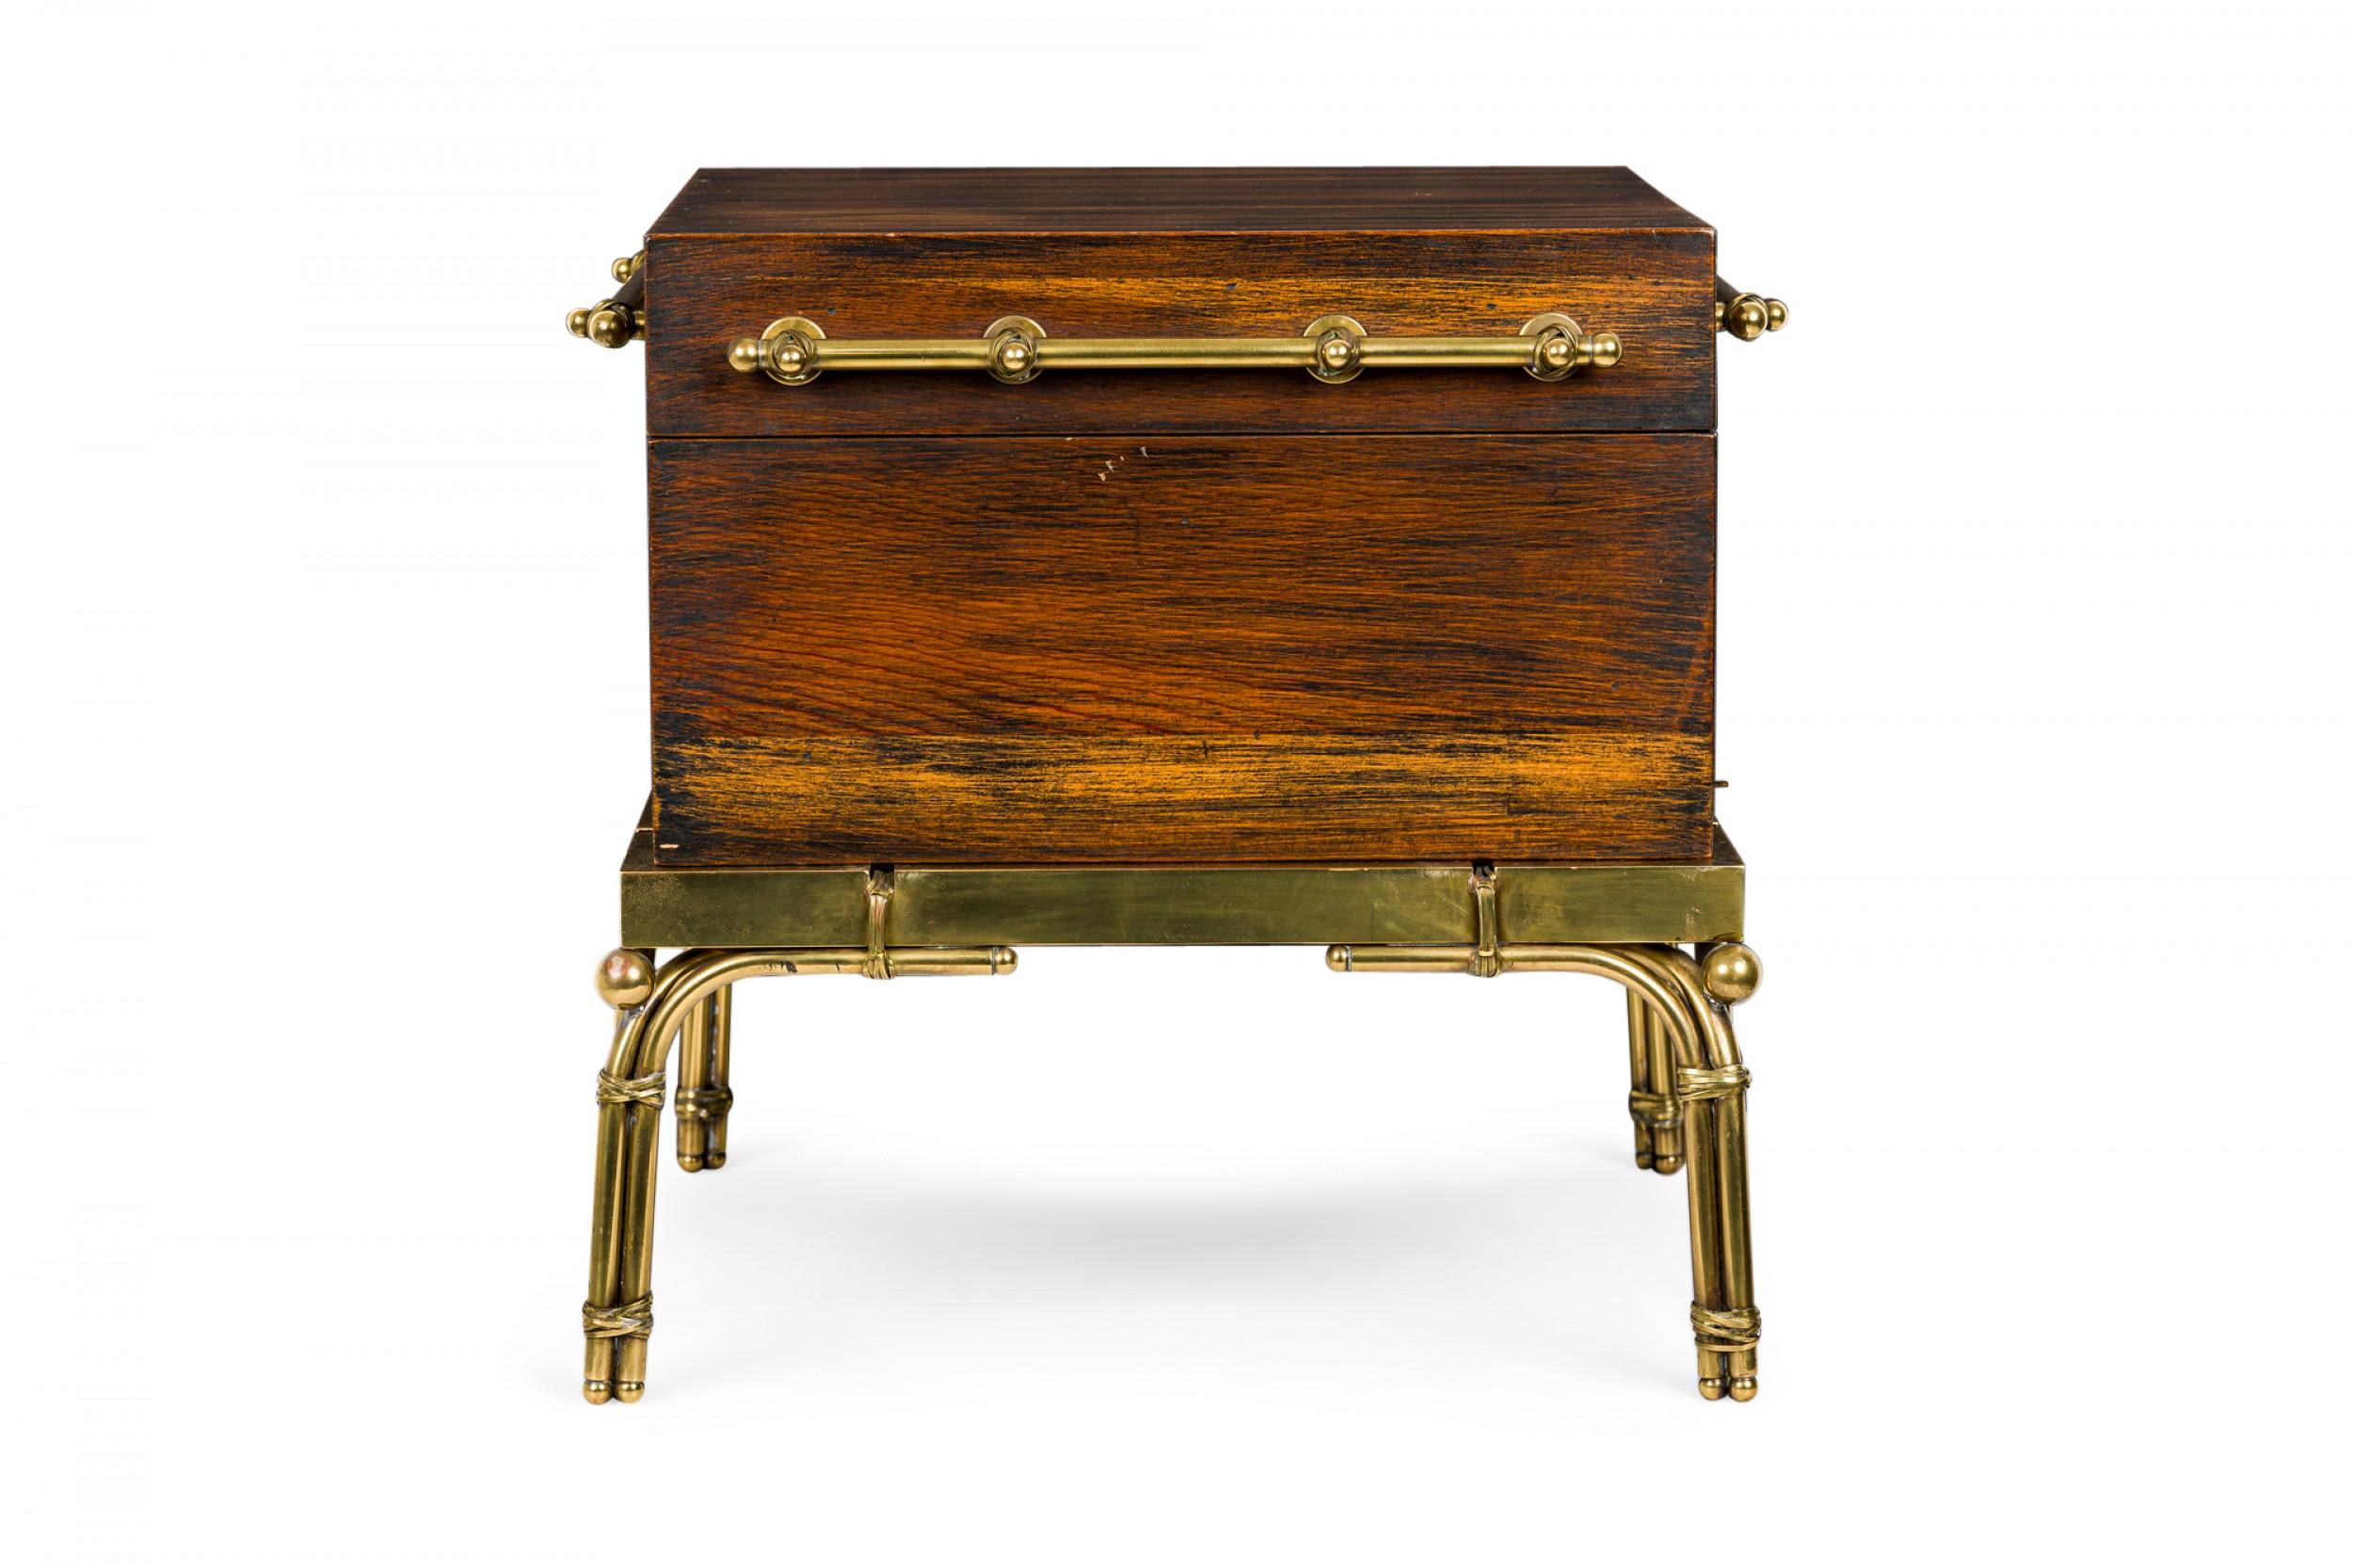 American Mid-Century strong box / chest with a painted and lacquered walnut hinge top case with wire wrapped brass handles, resting on a four-legged brass base. (CHAPMAN / MASTERCRAFT).